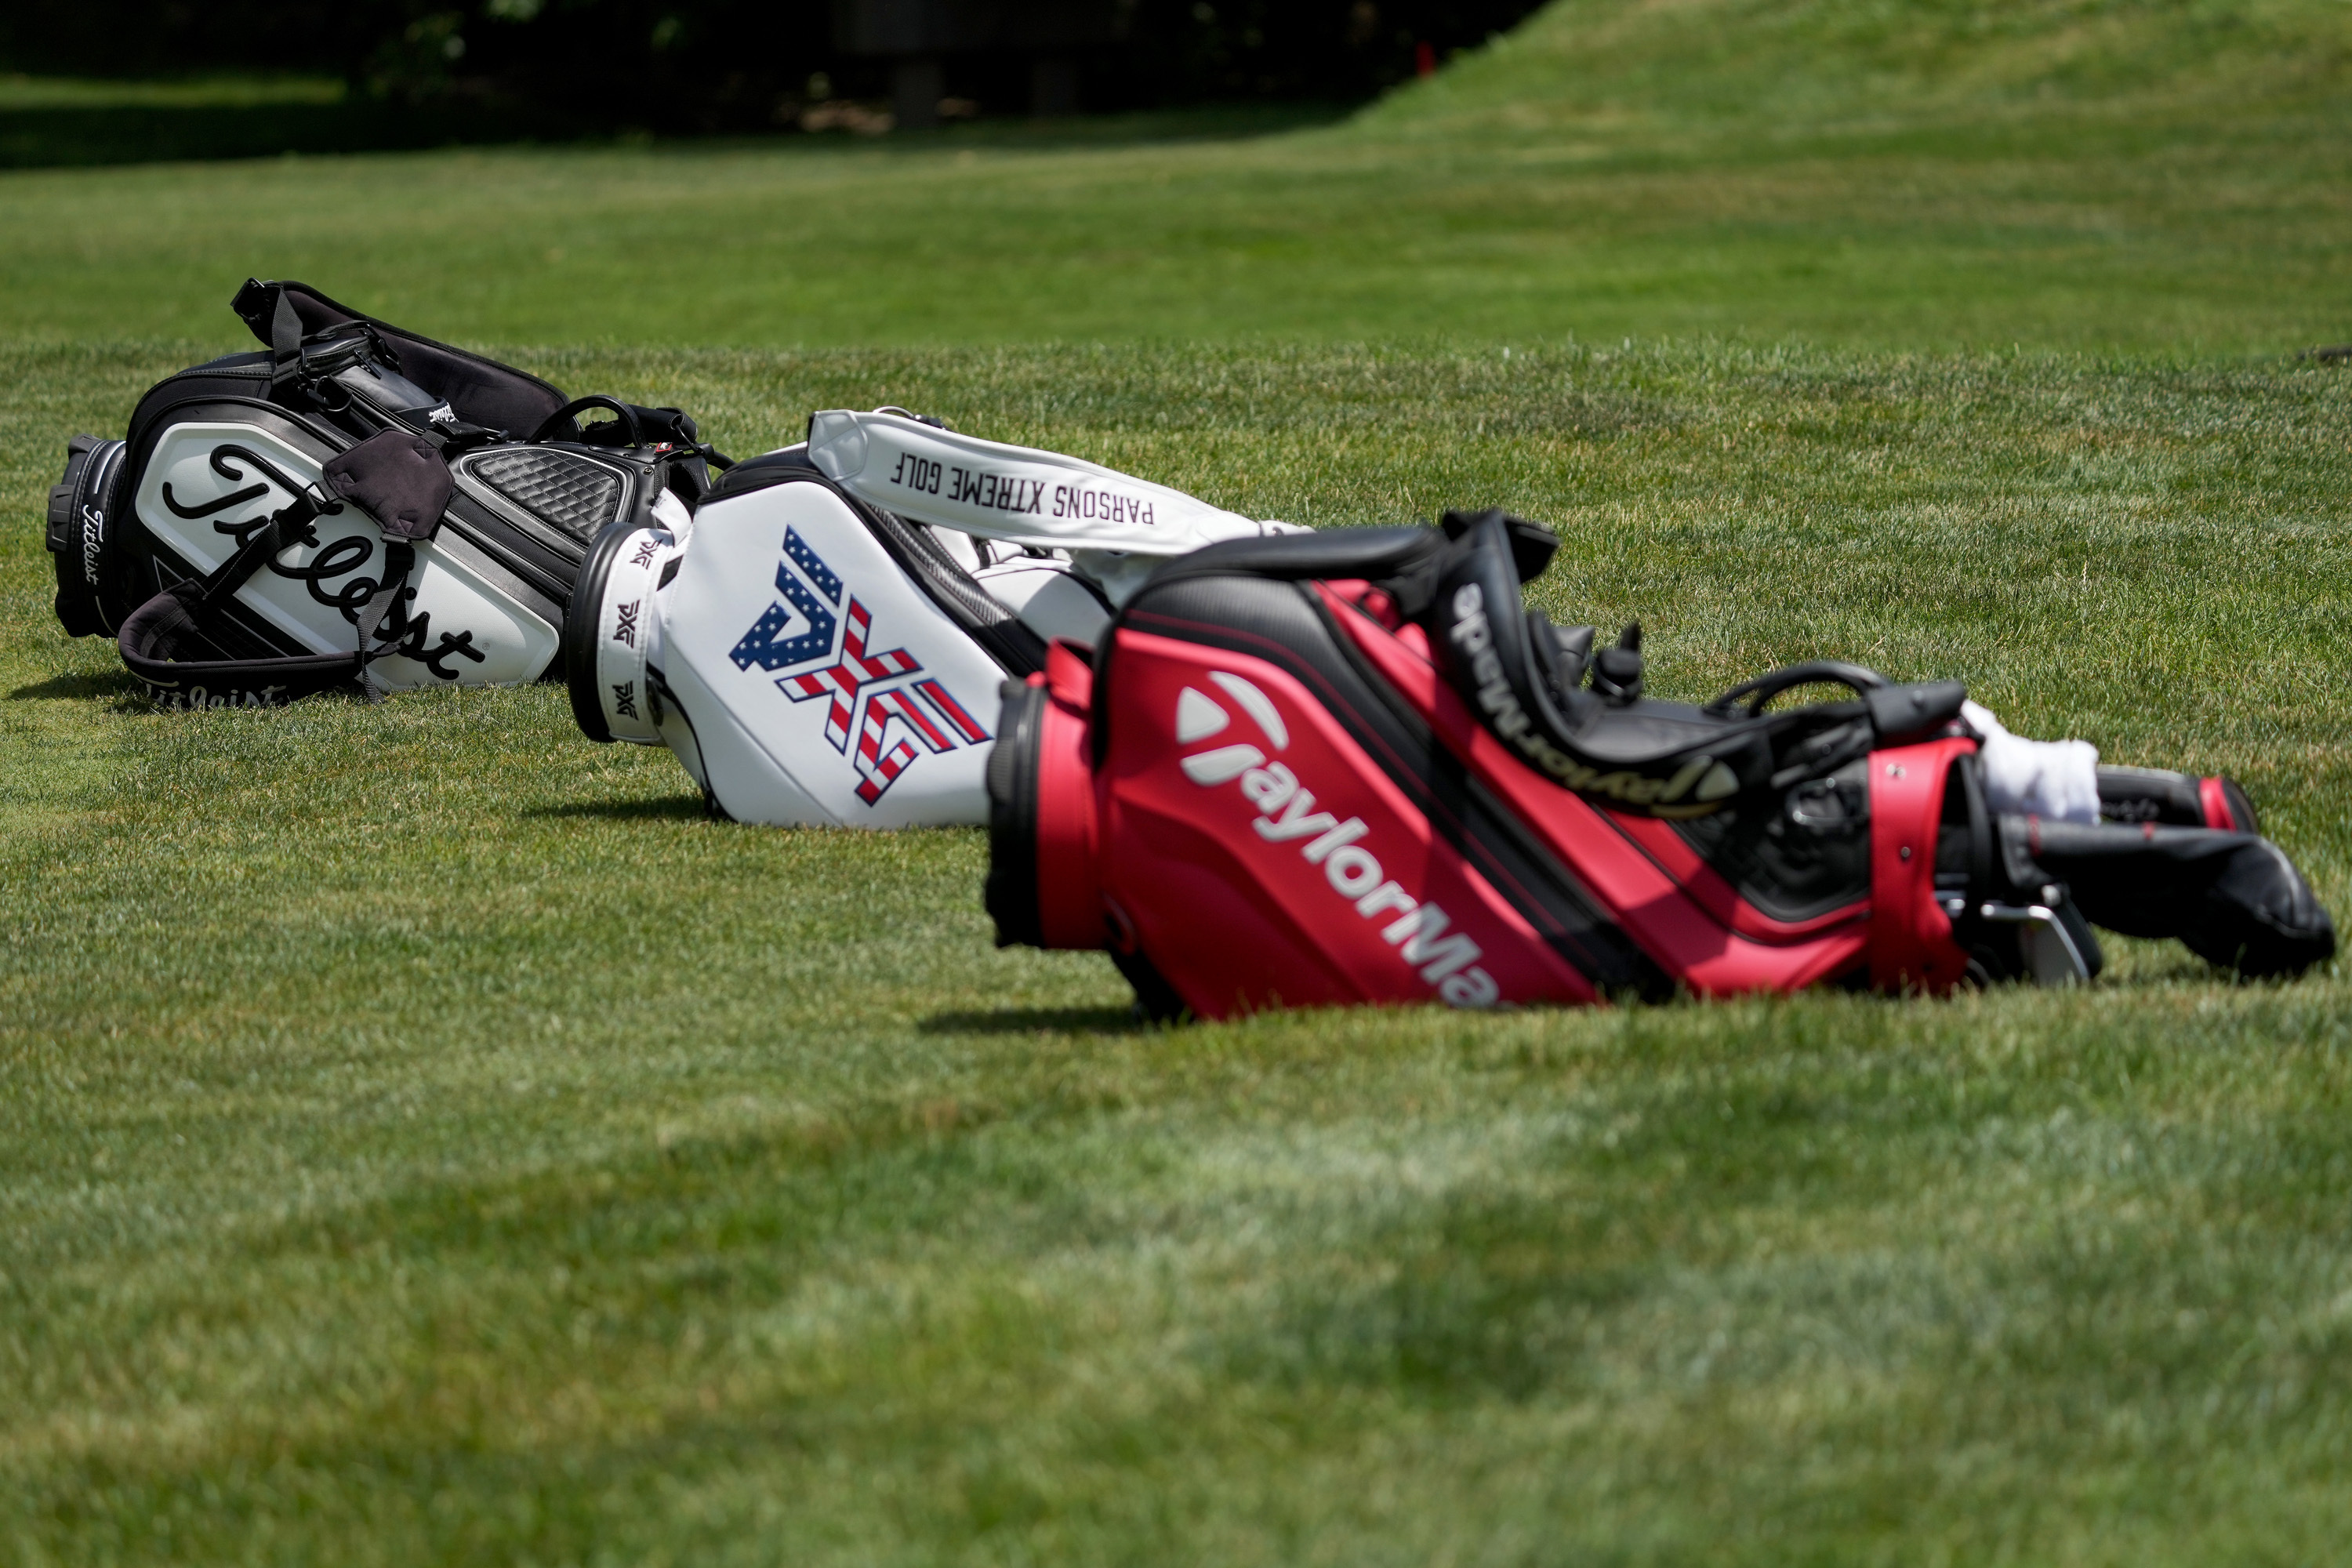 Three golf bags on ground at tournament